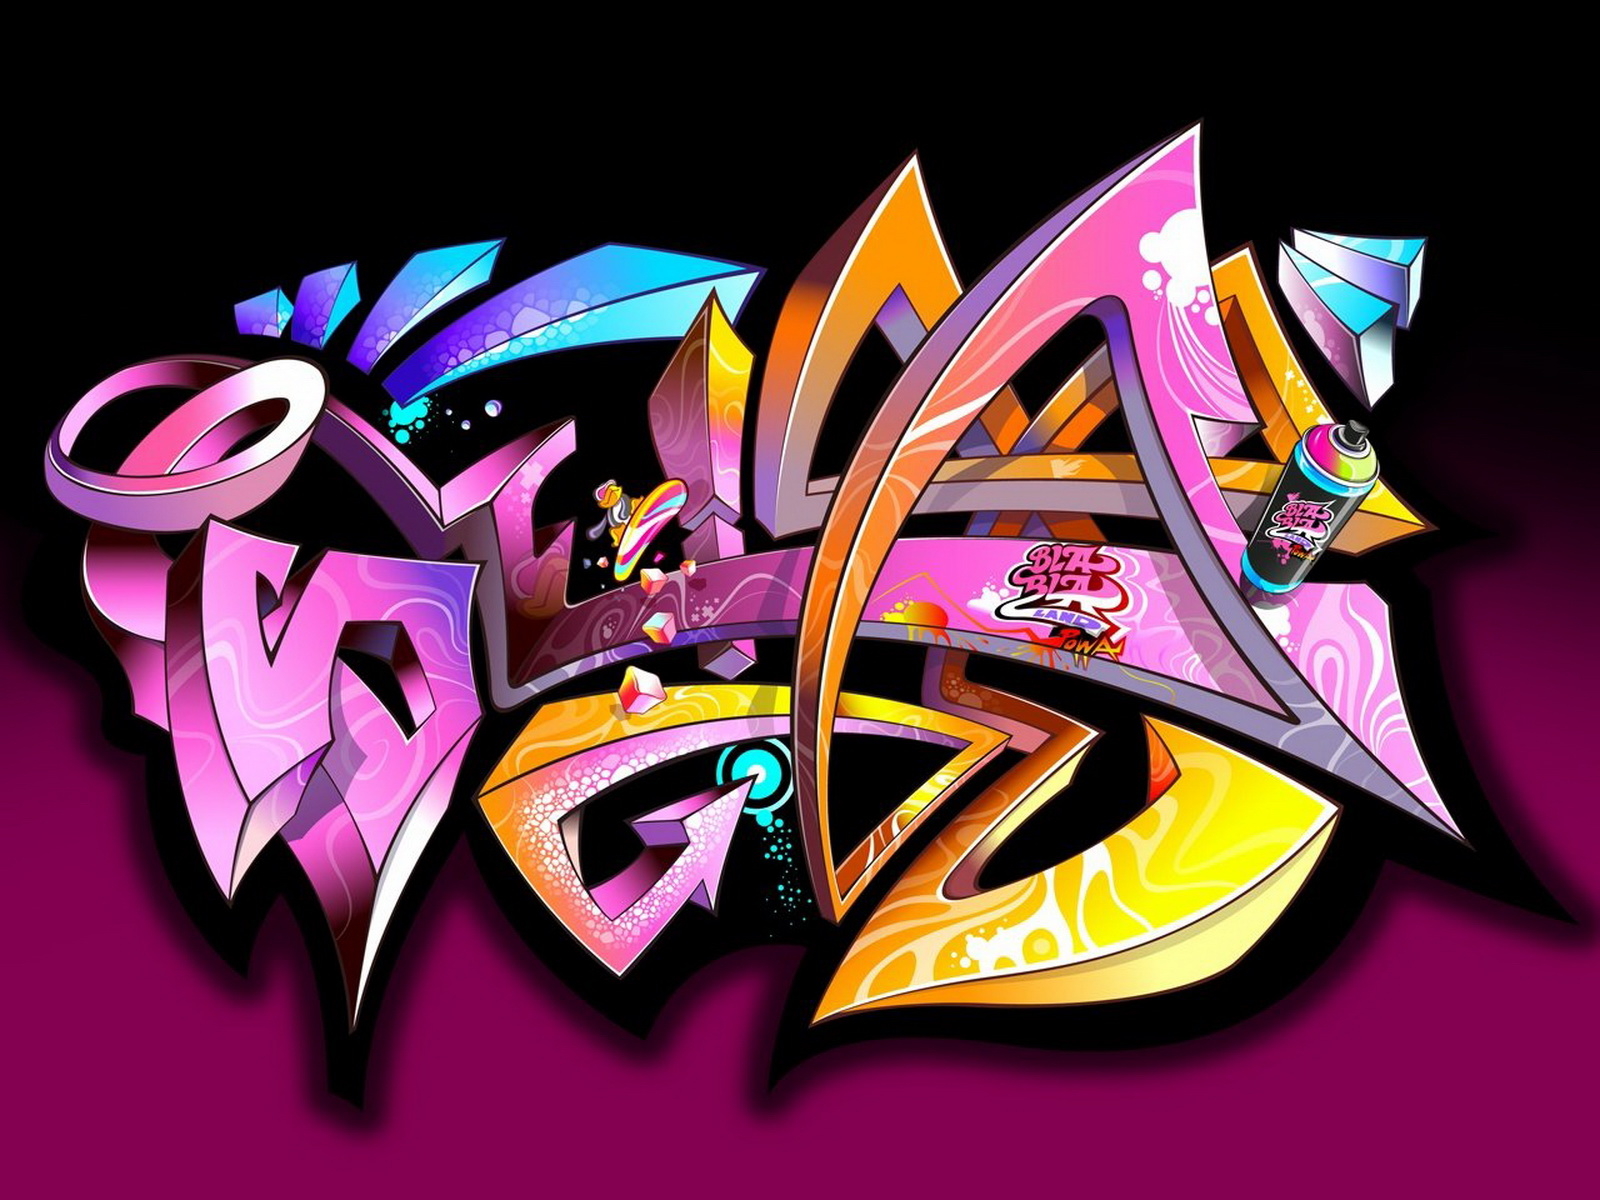 Download Free Graffiti Wallpaper Images For Laptop - Graffiti Wallpaper 3d - HD Wallpaper 